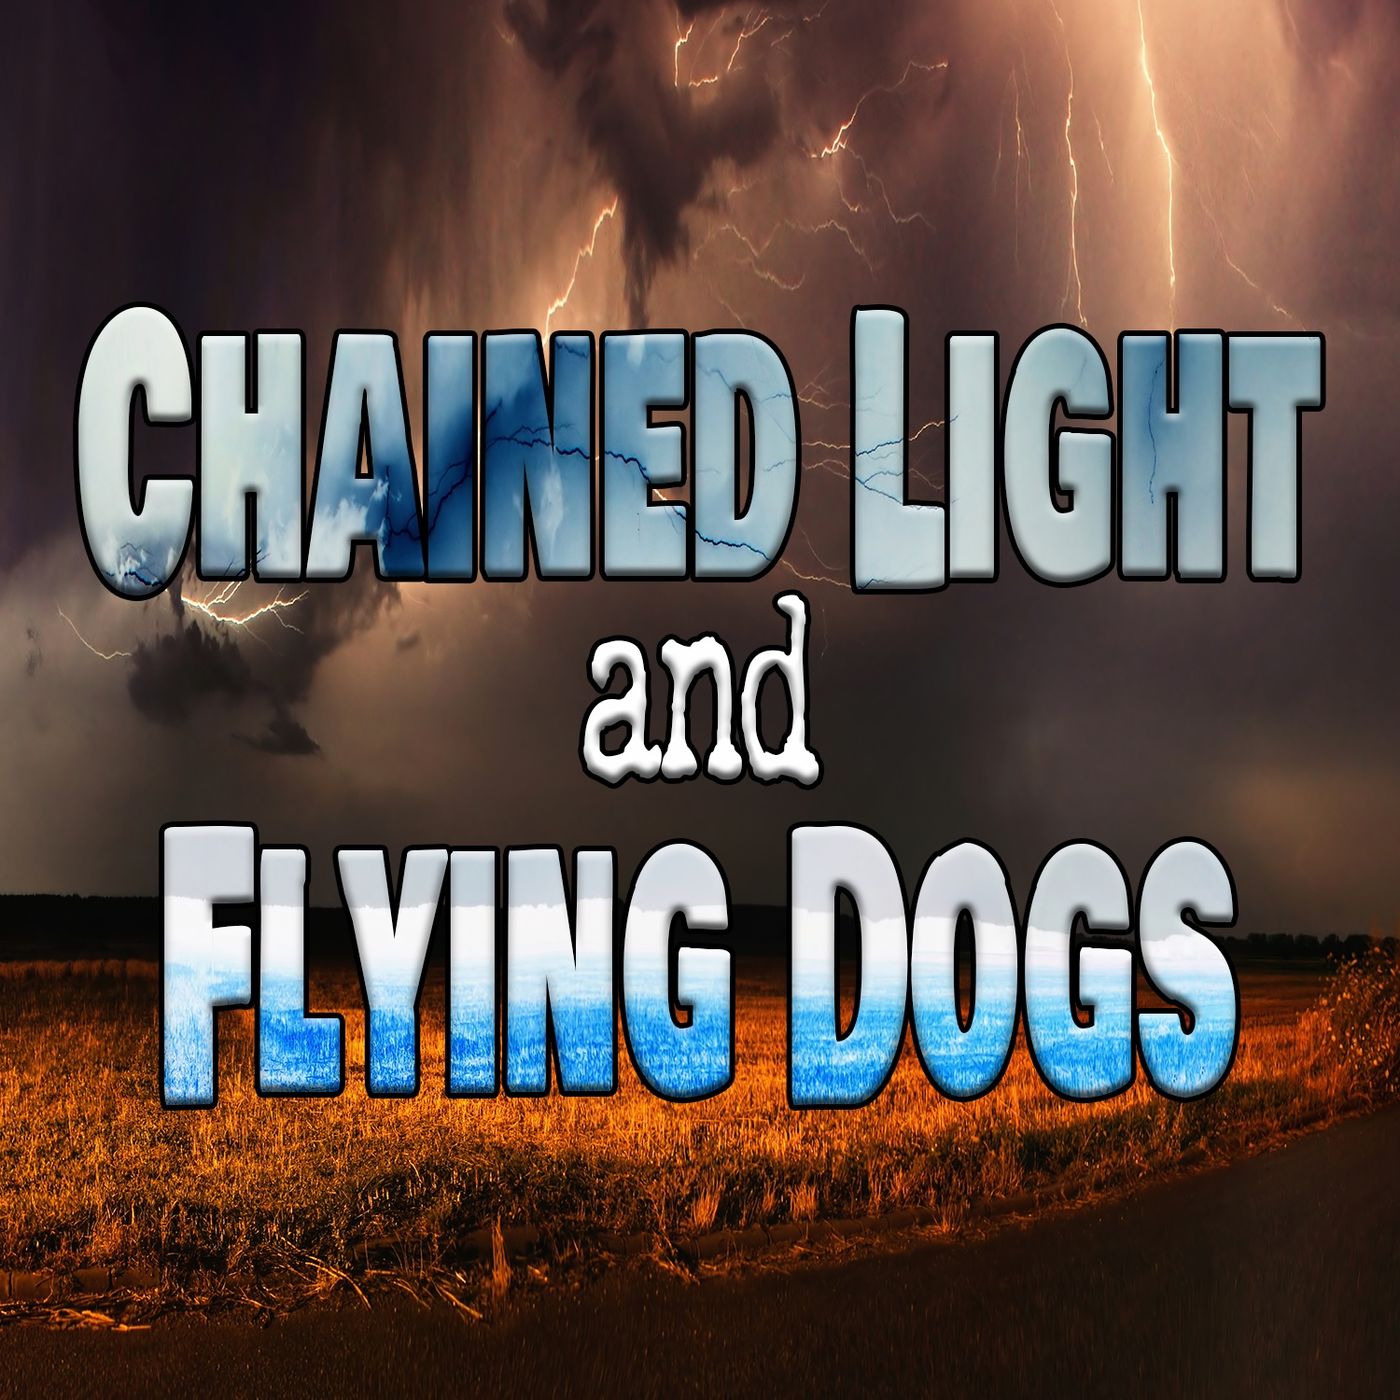 Chained Light & Flying Dogs